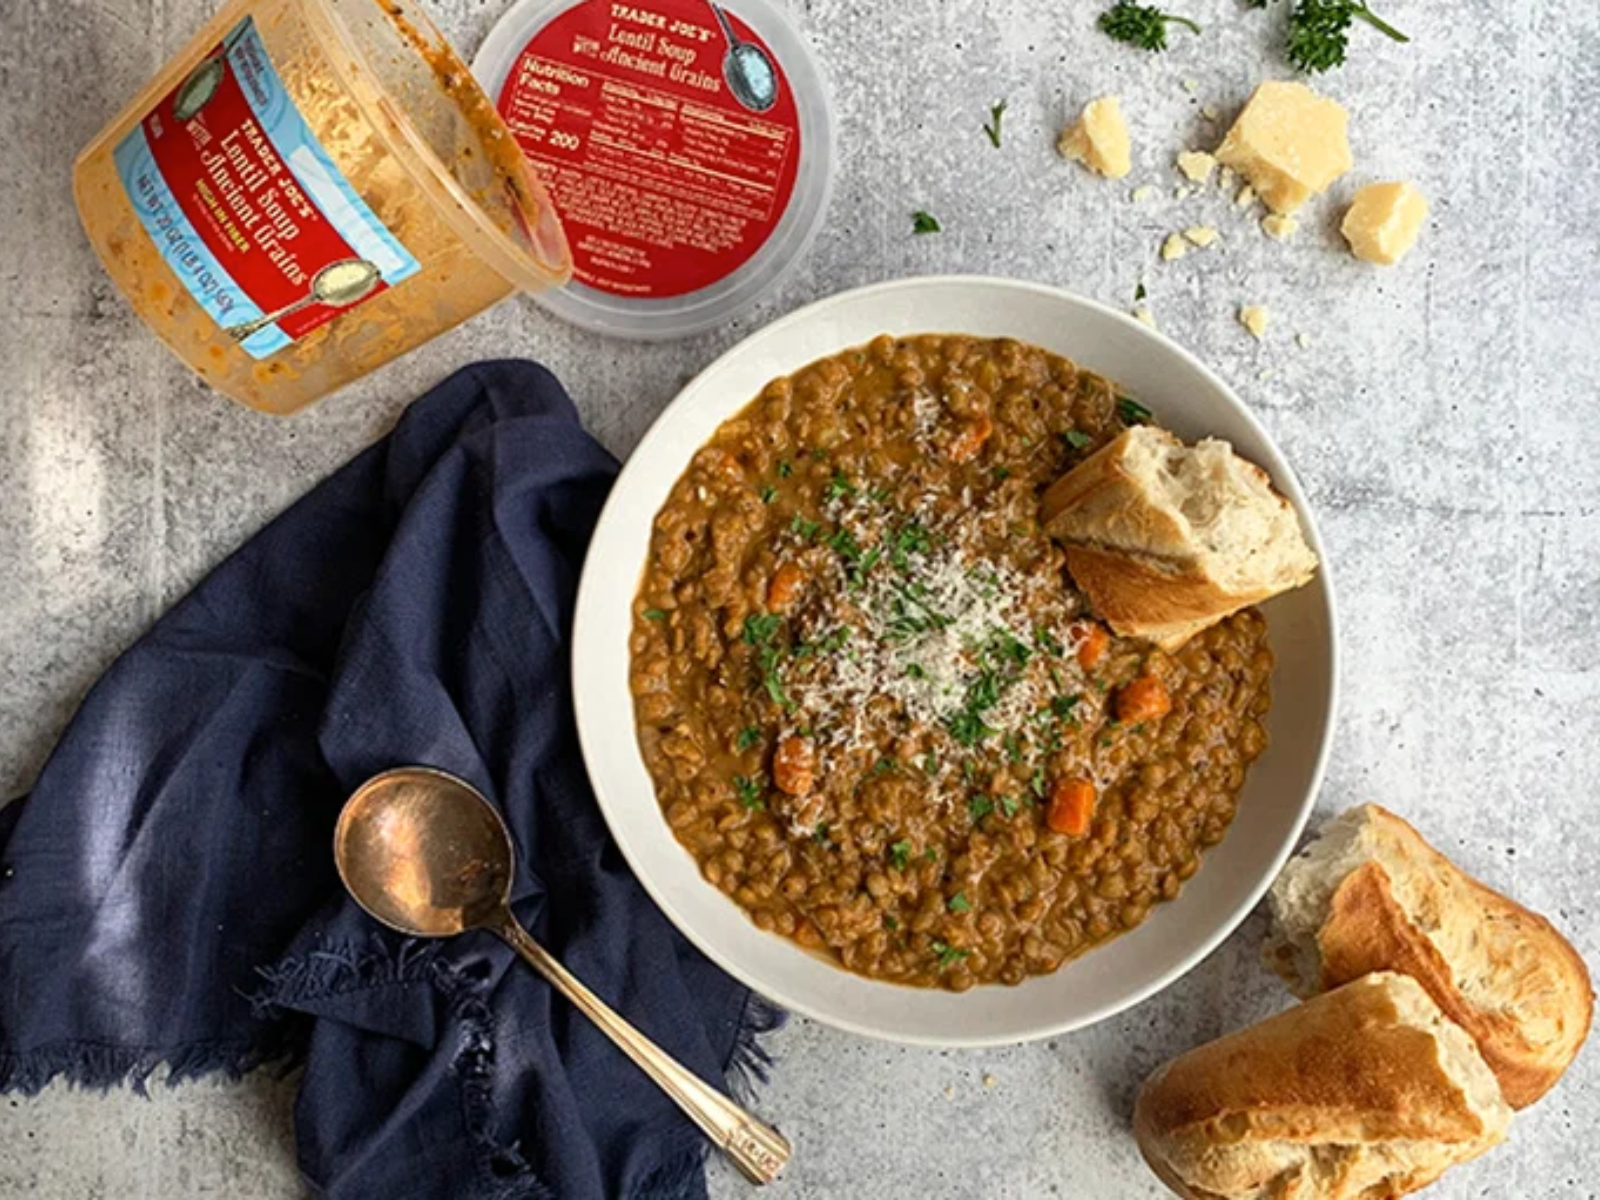 trader joes lentil soup ancient grains in a bowl and bread